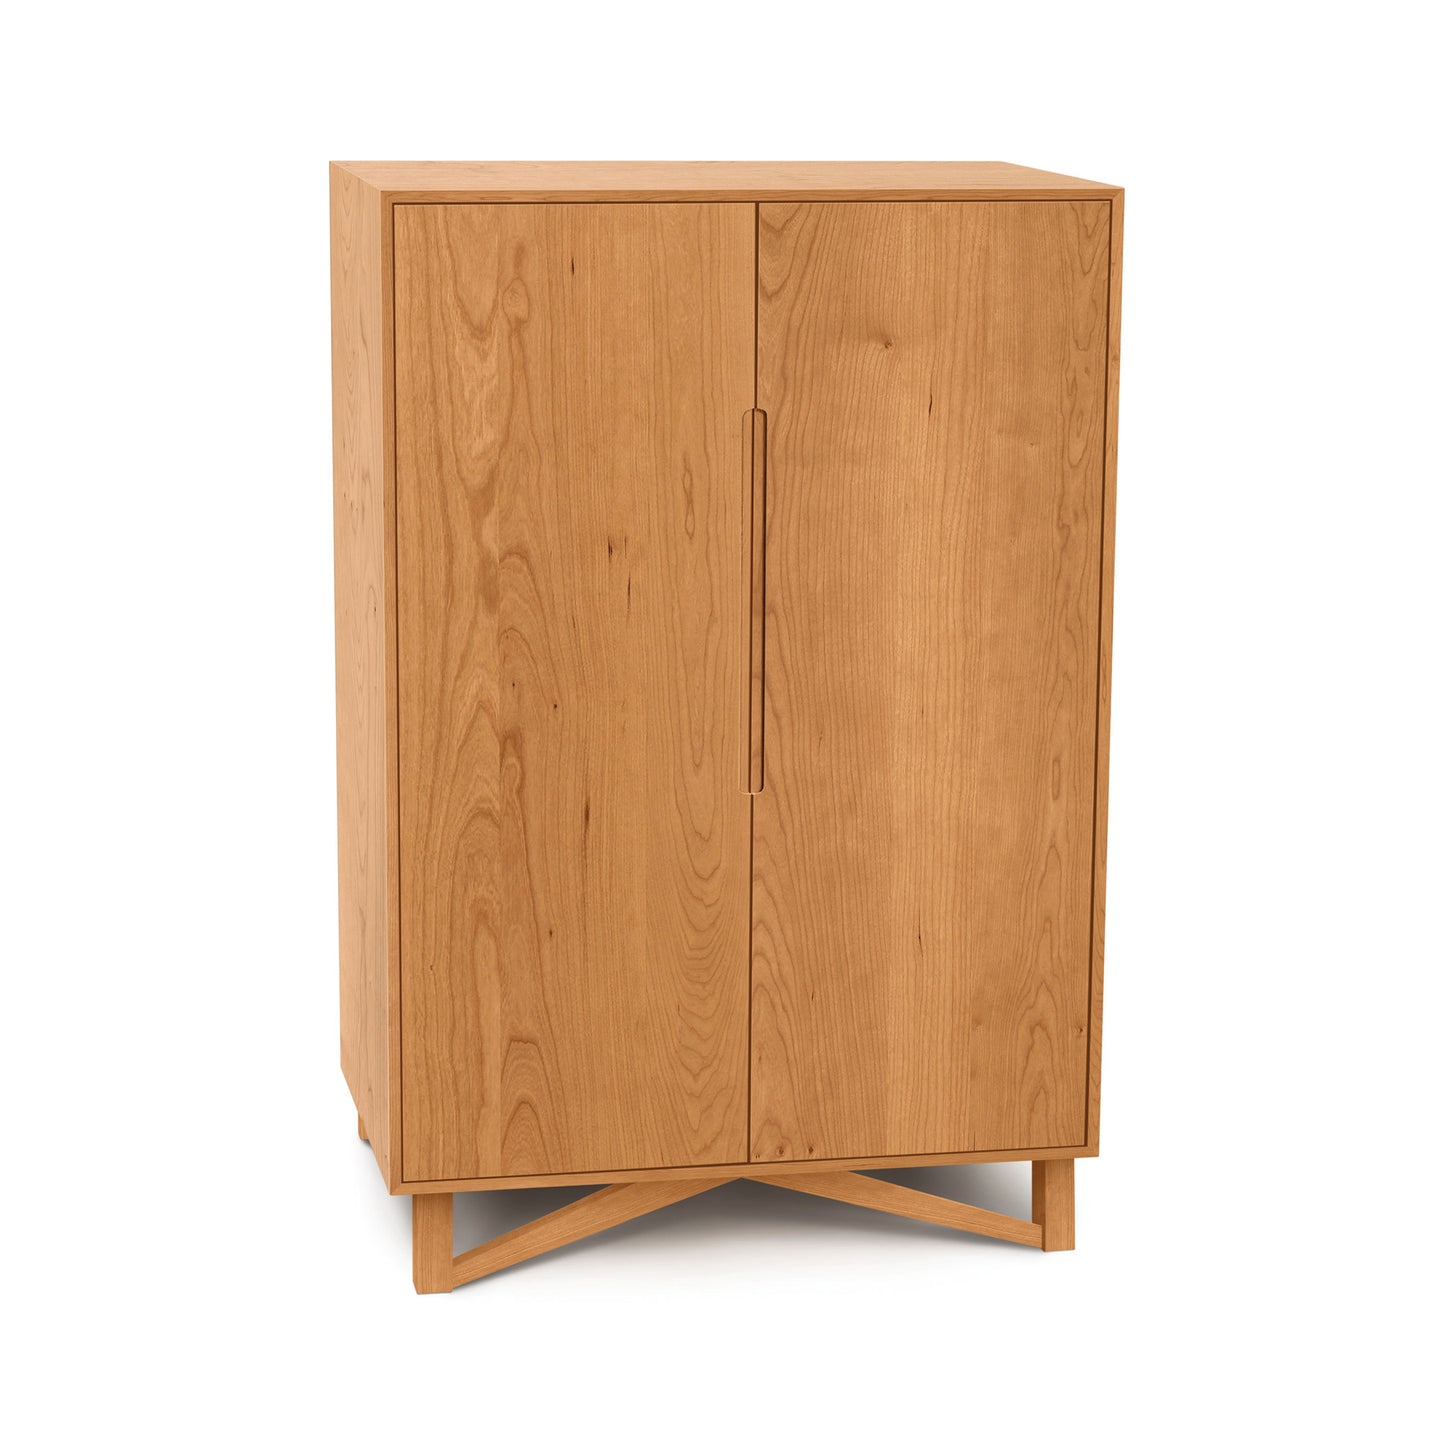 A solid hardwoods Copeland Furniture Exeter Bar Cabinet with two doors, standing on angled legs, isolated on a white background.